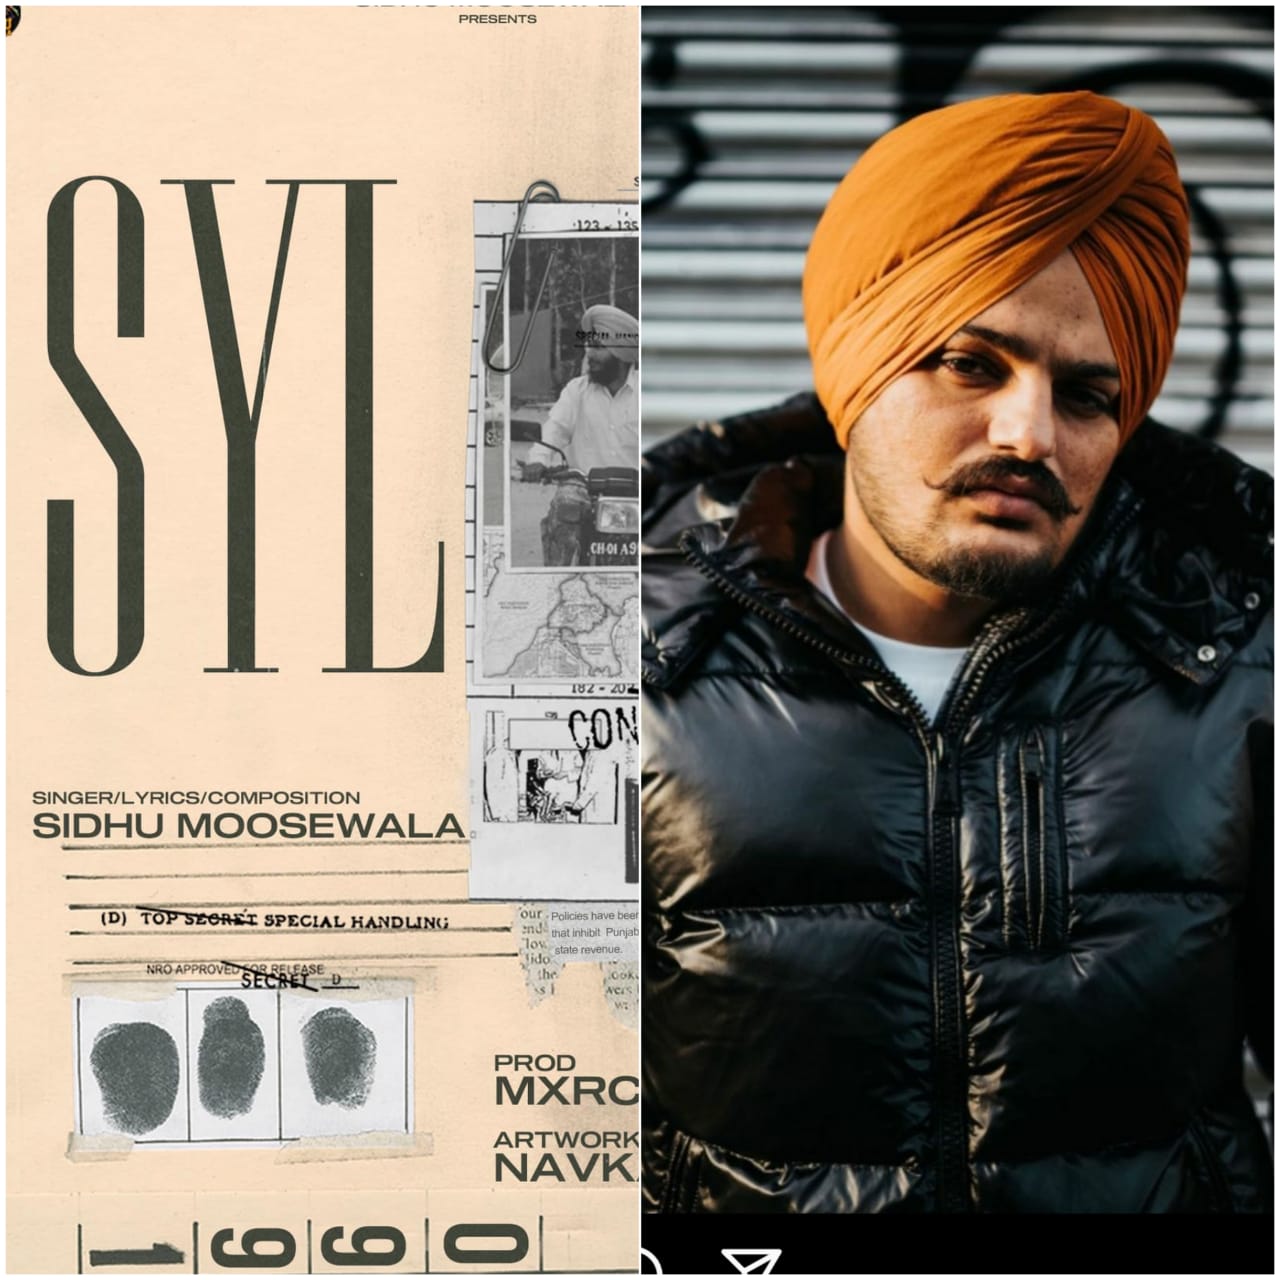 Sidhu Moosewala’s new song ‘SYL’ removed from YouTube